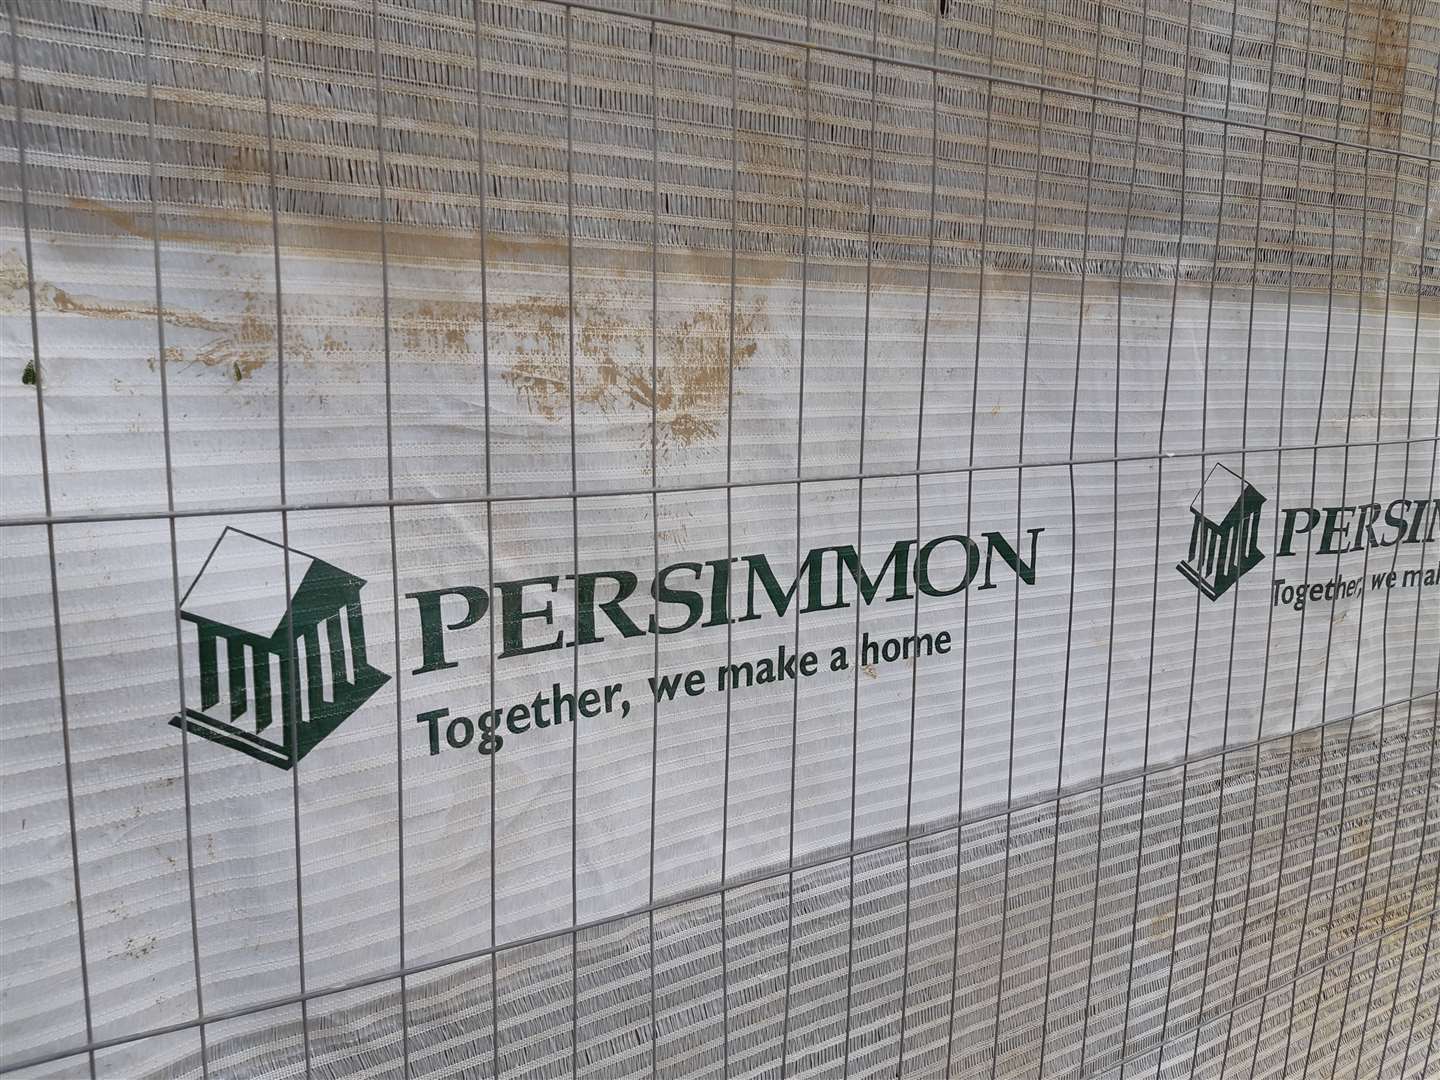 Persimmon Homes say it will issue letters about cavity barriers to homes in Aylesham Village from this week